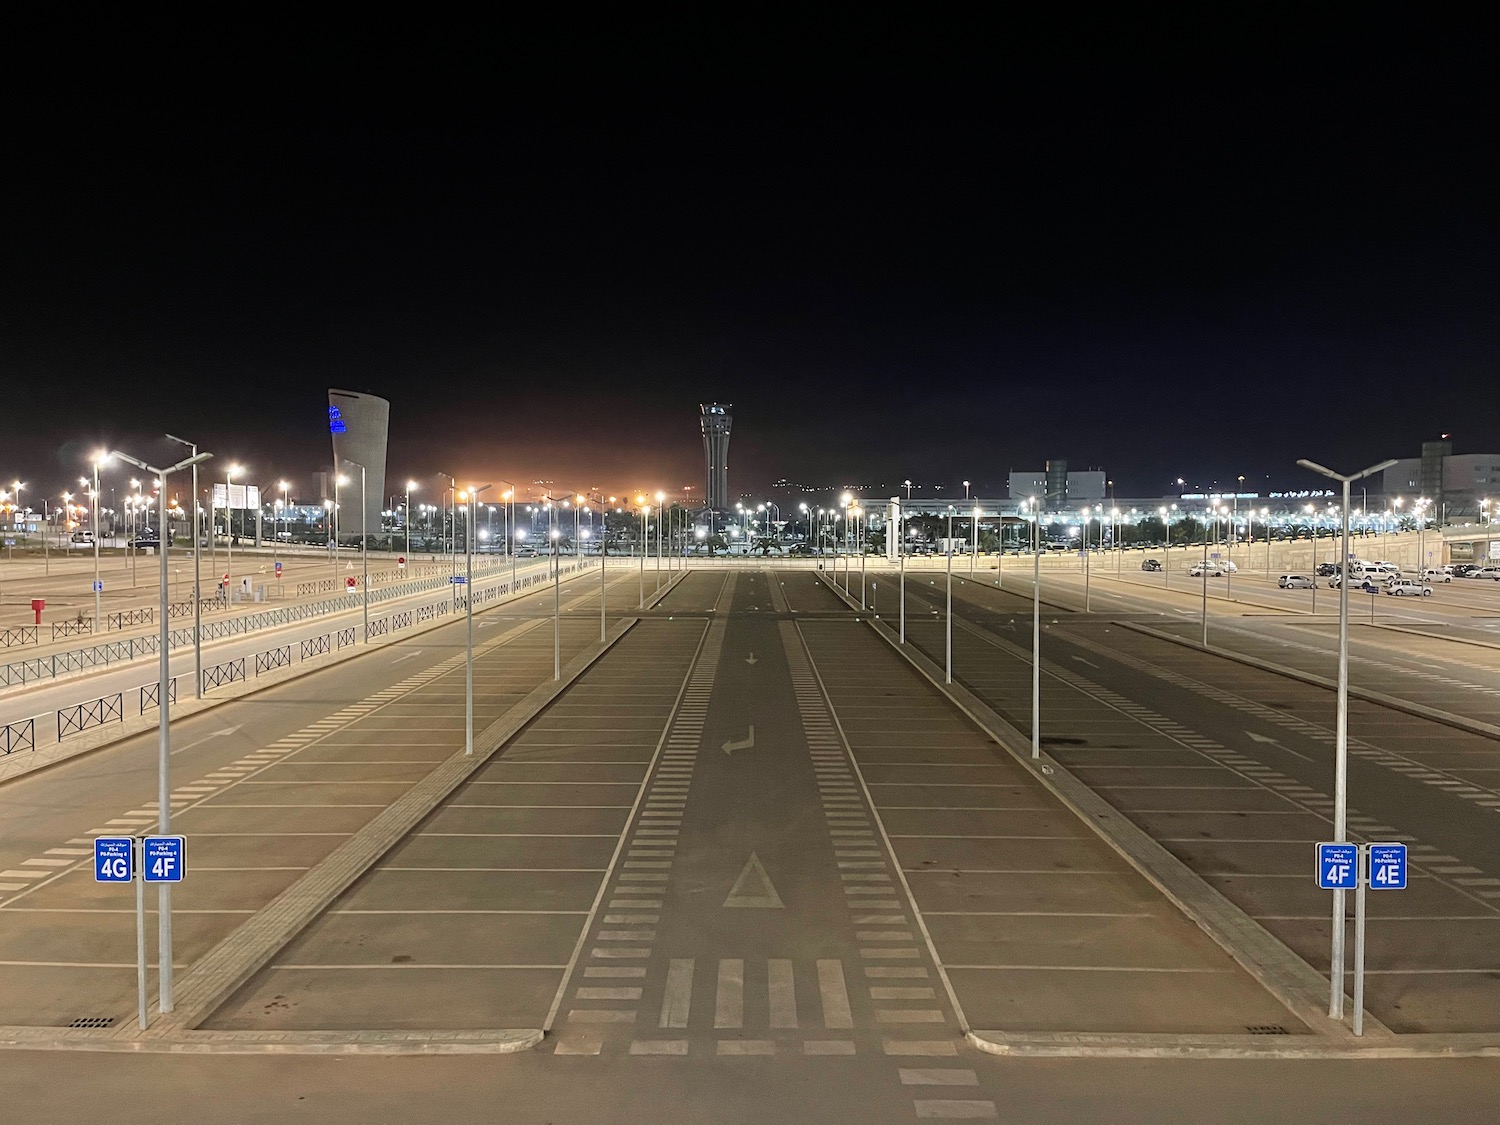 a empty parking lot at night